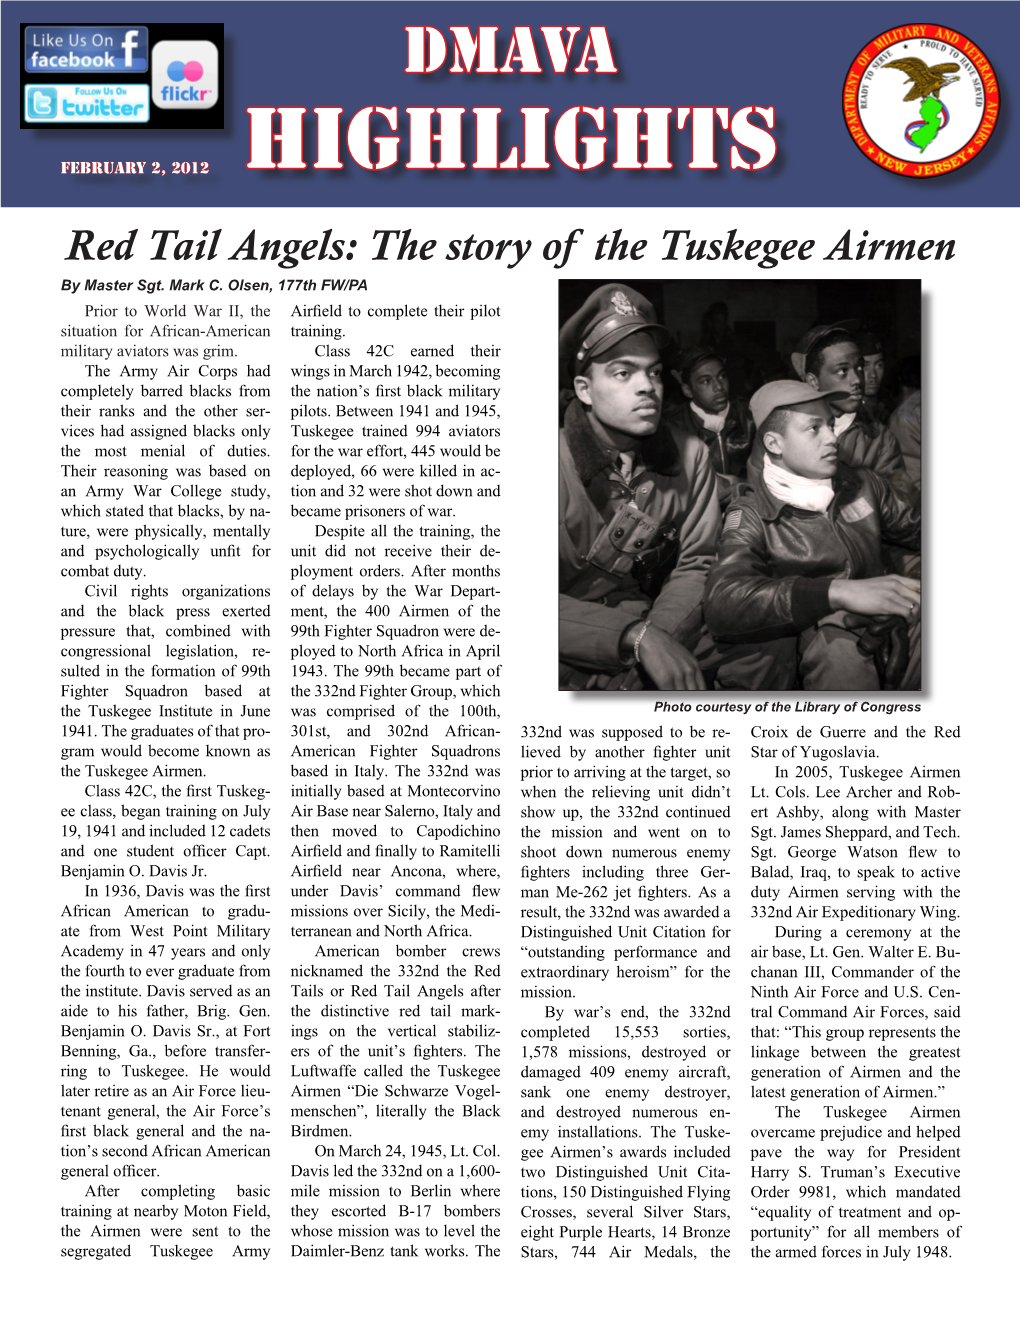 HIGHLIGHTS Red Tail Angels: the Story of the Tuskegee Airmen by Master Sgt